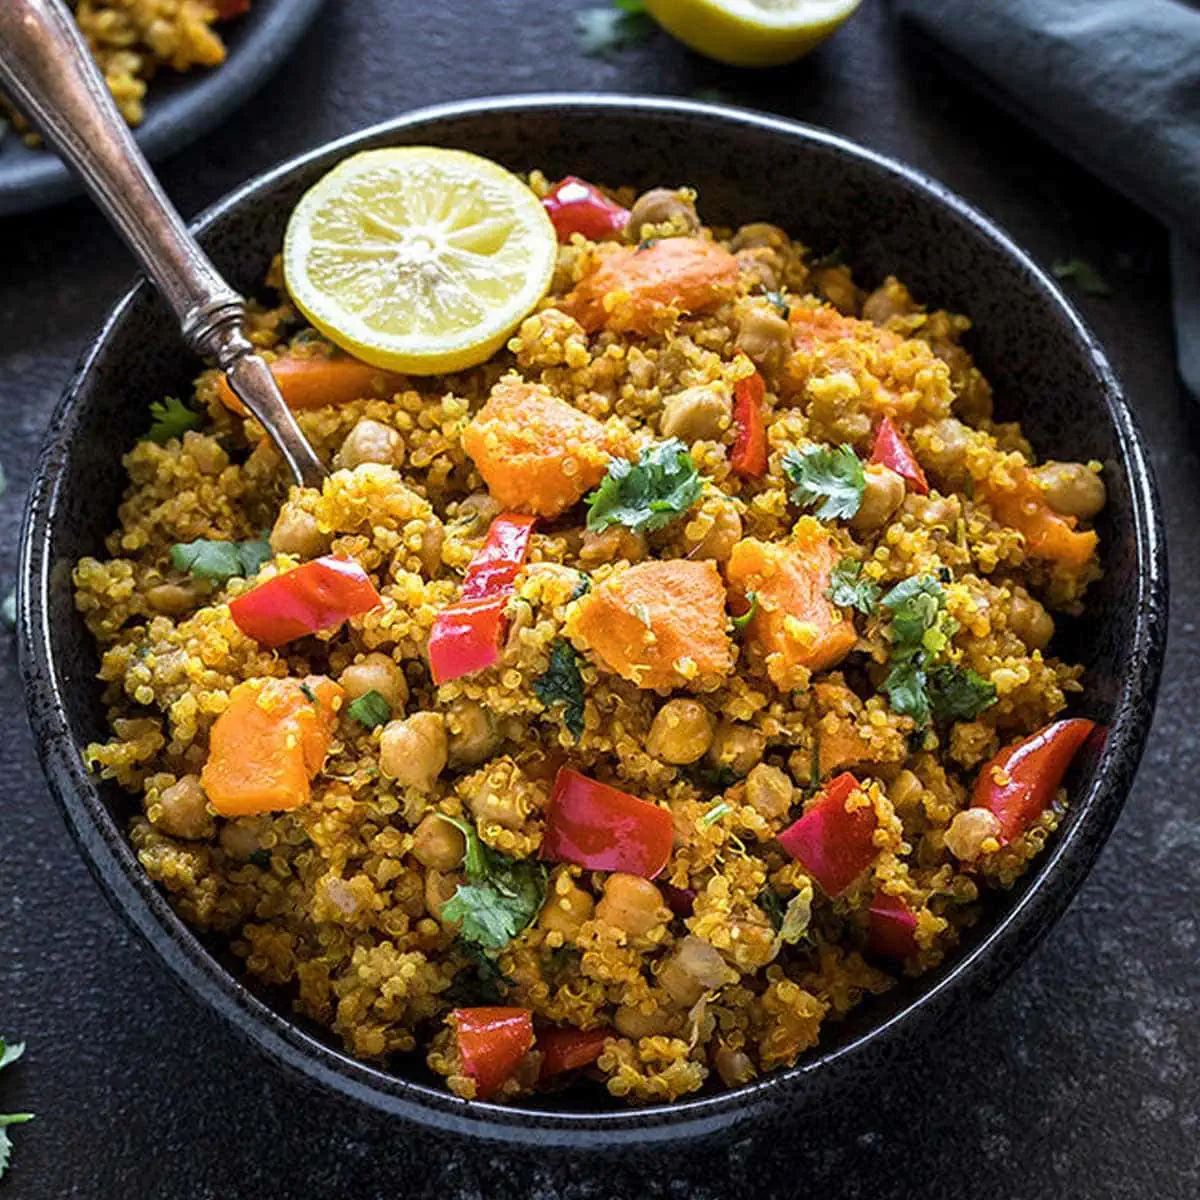 Instant Pot Curried Sweet Potato Chickpea Quinoa in a black bowl and a half cut lemon on the side